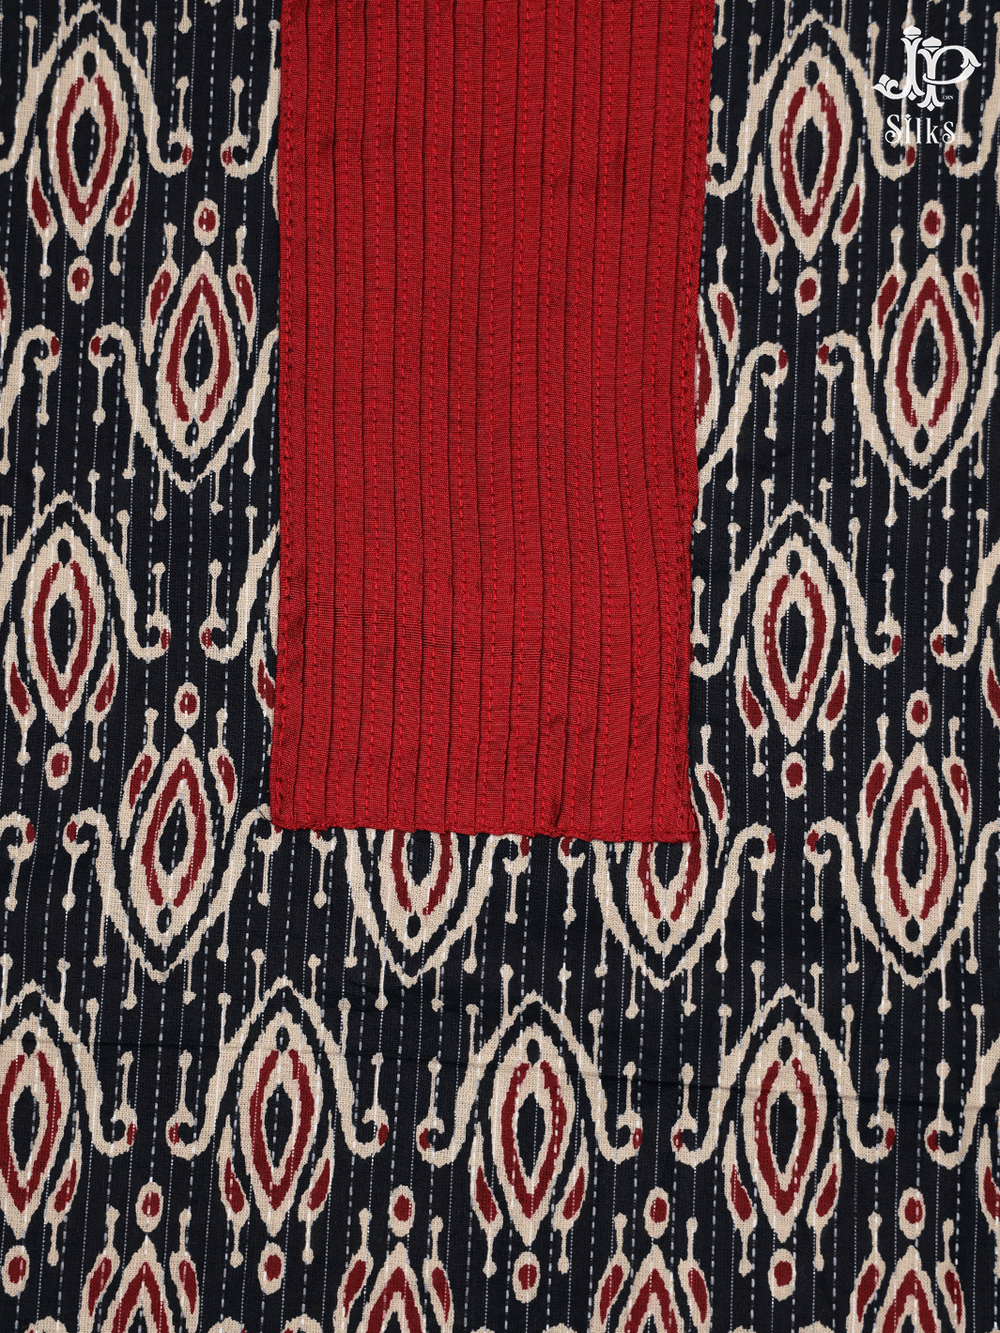 Red and Black Cotton Chudidhar Material - E6127 - View 1